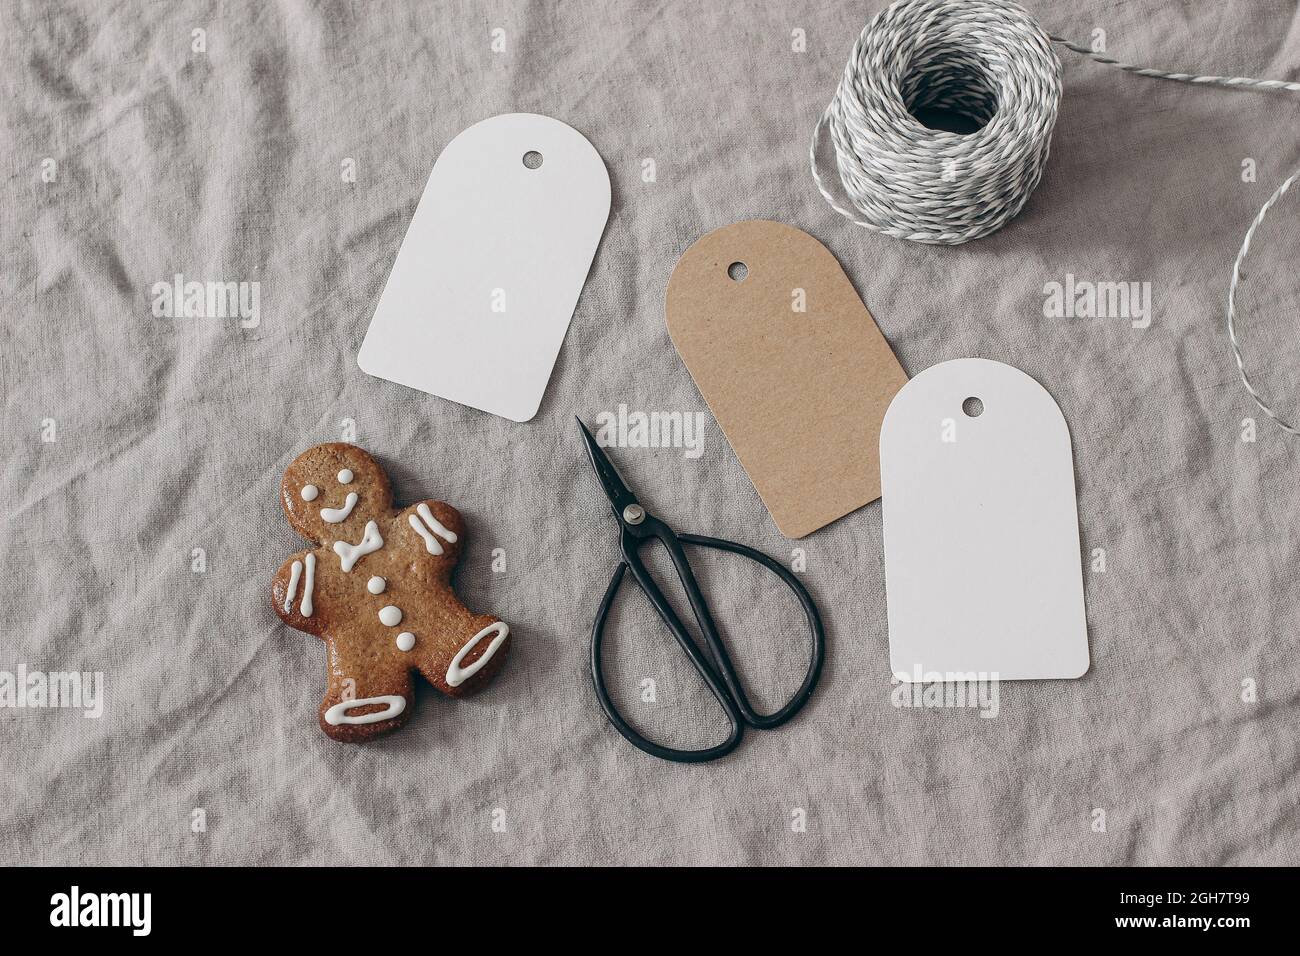 Christmas still life. Blank paper gift tags, labels mockups. Gingerbread cookie, black vintage scissors and decorative rope on beige linen tablecloth Stock Photo